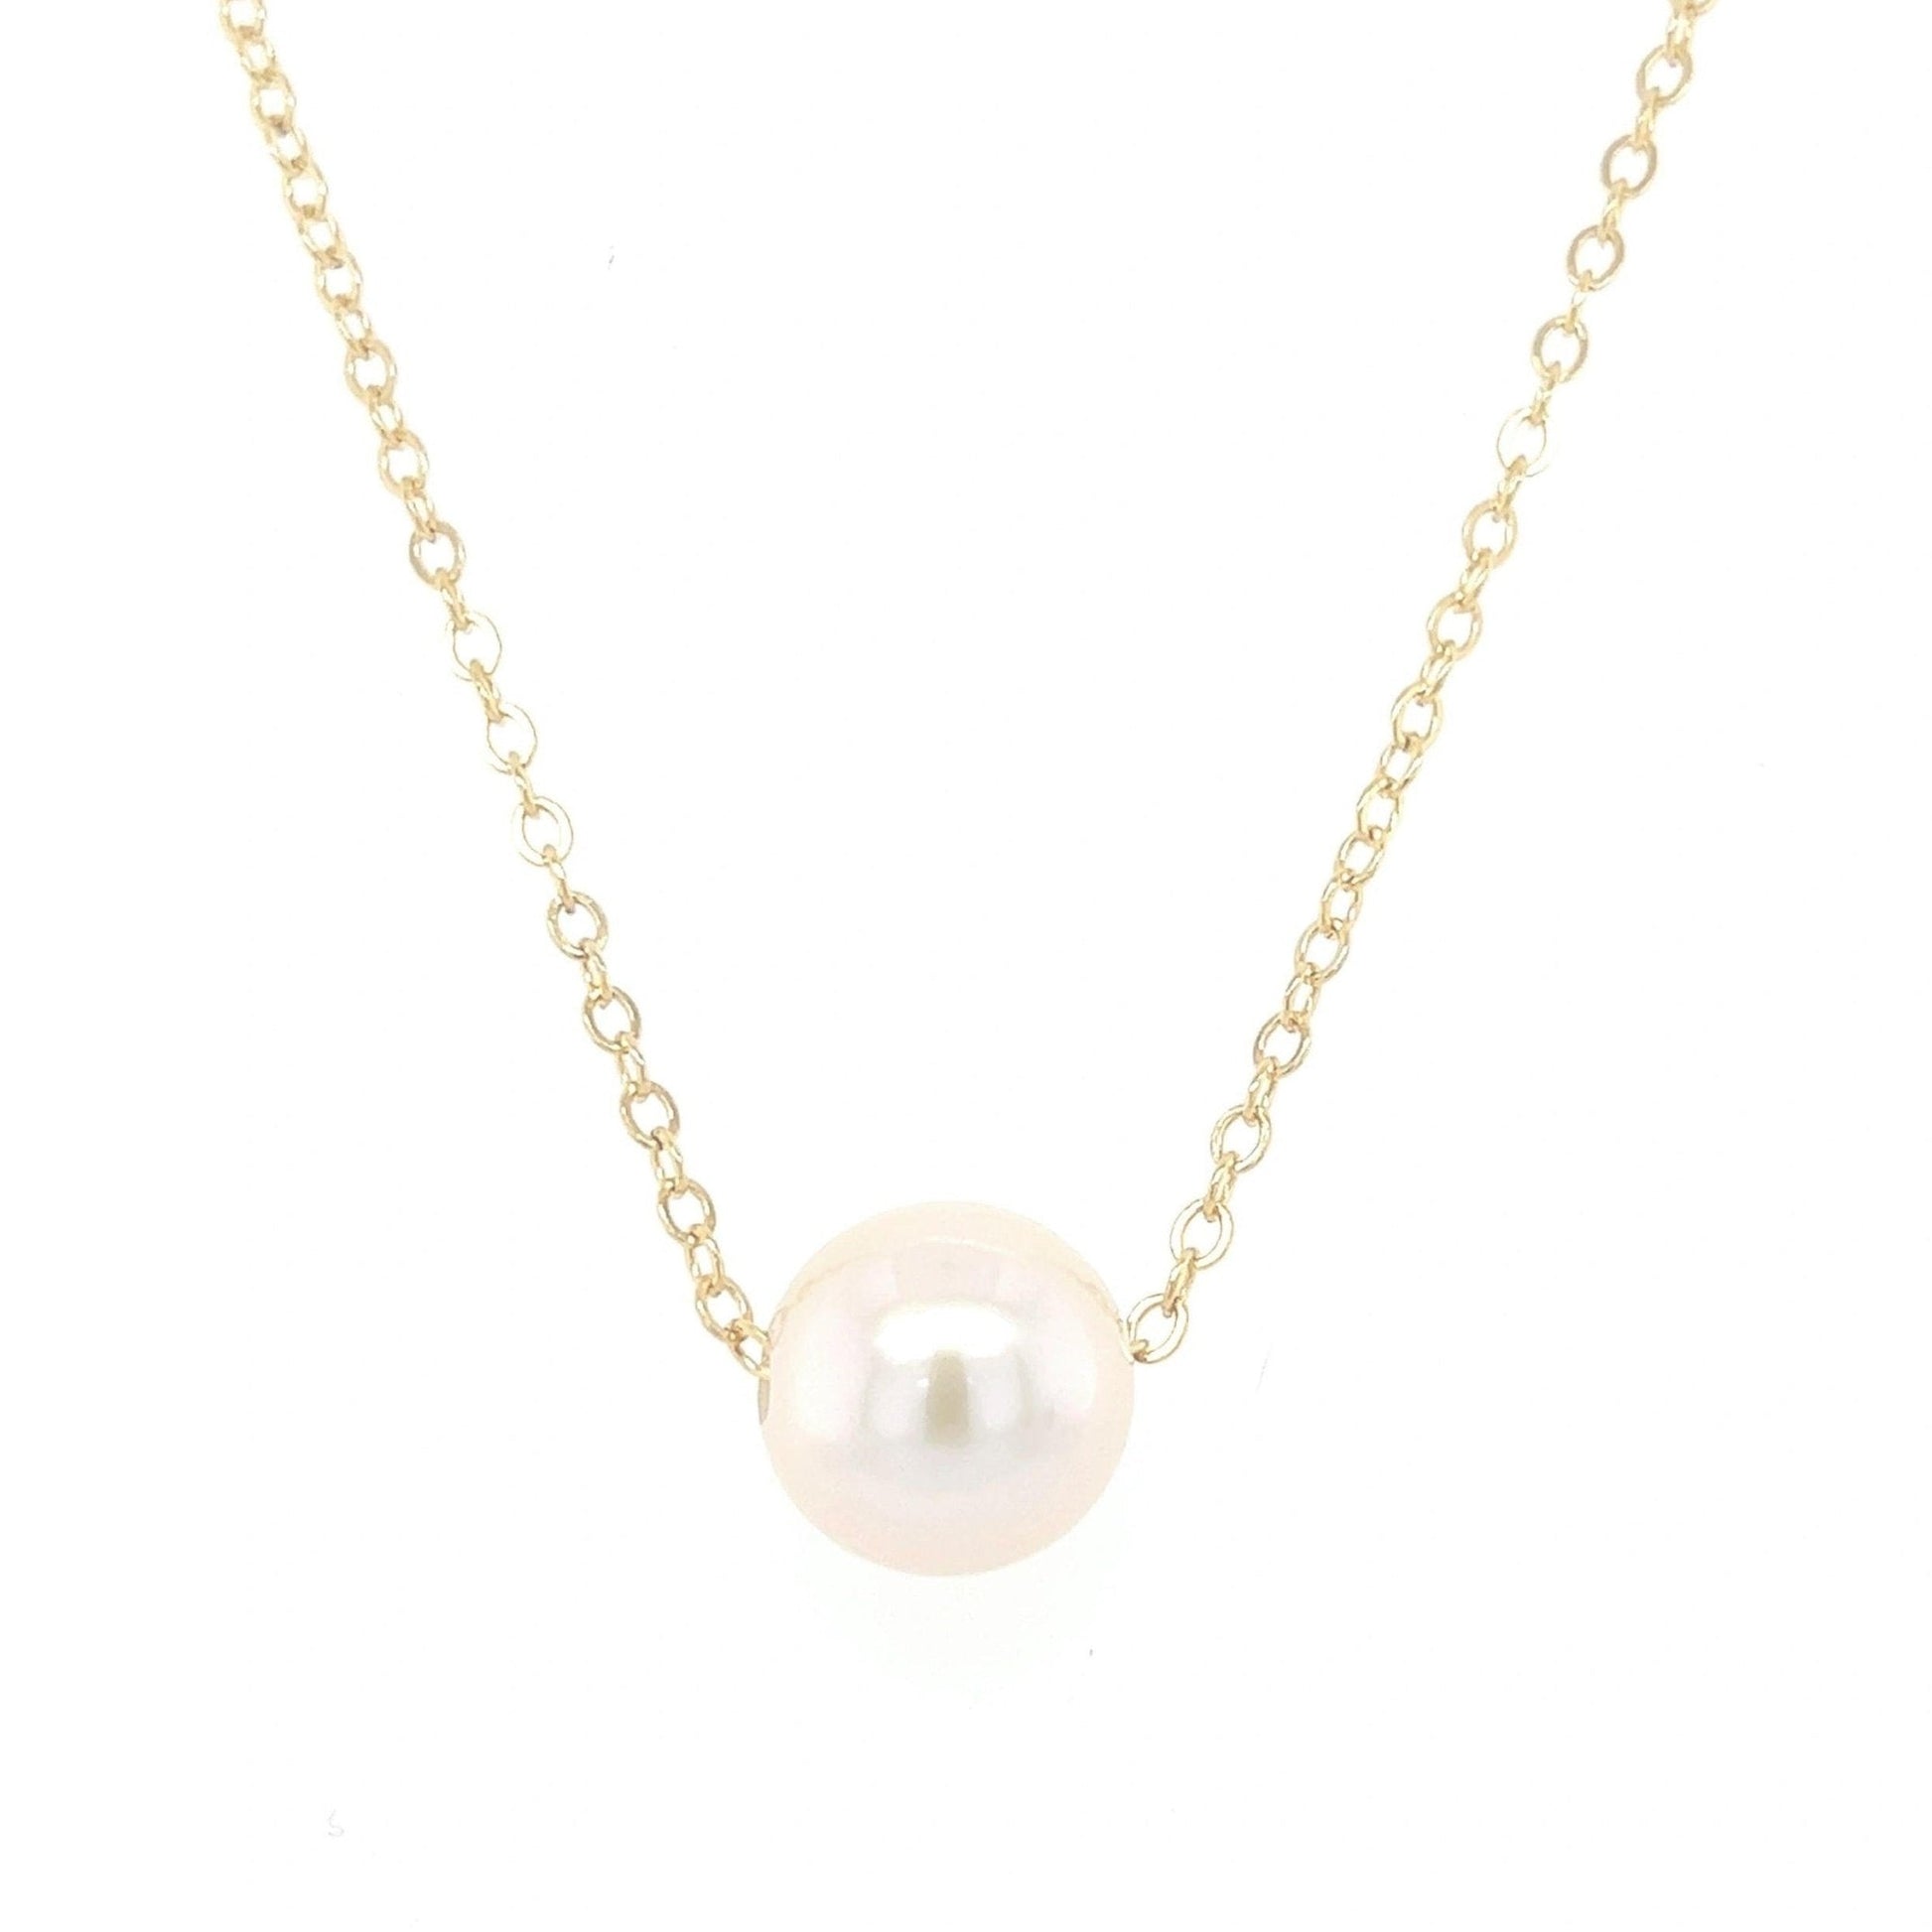 White Edison Pearl Floater Necklace - Kahakai Collections